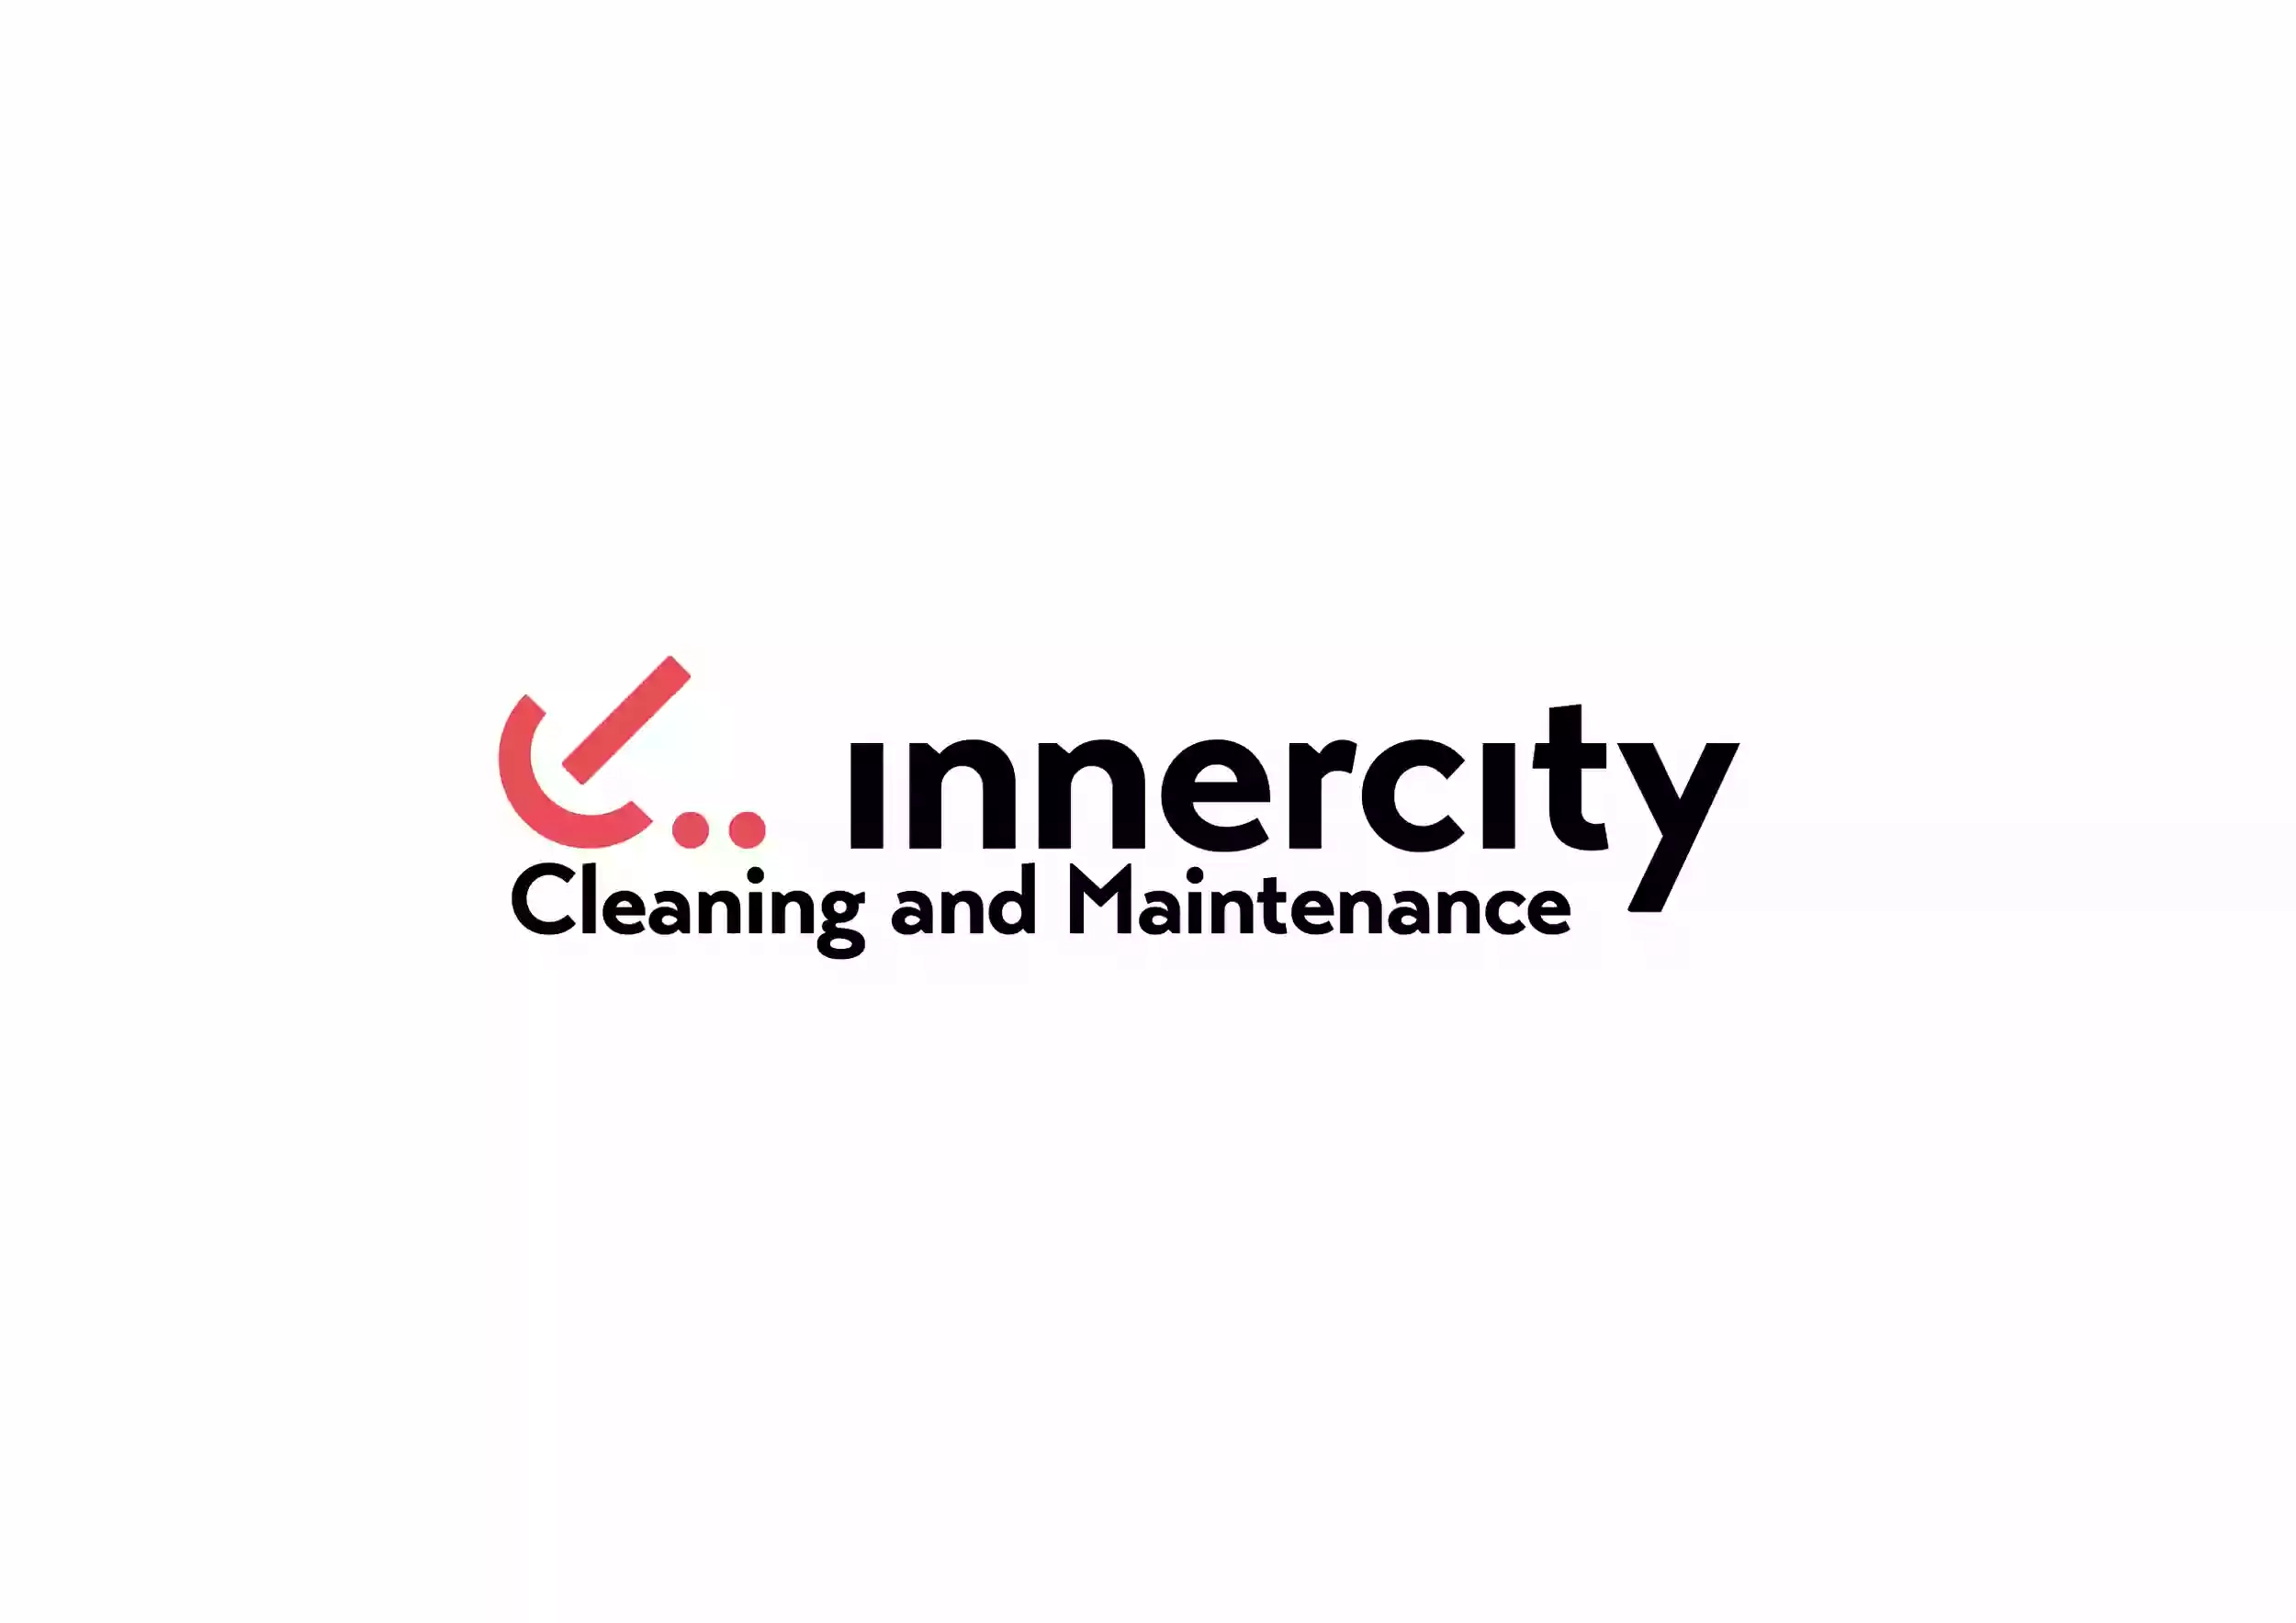 Innercity Maintenance and Cleaning Services Limited